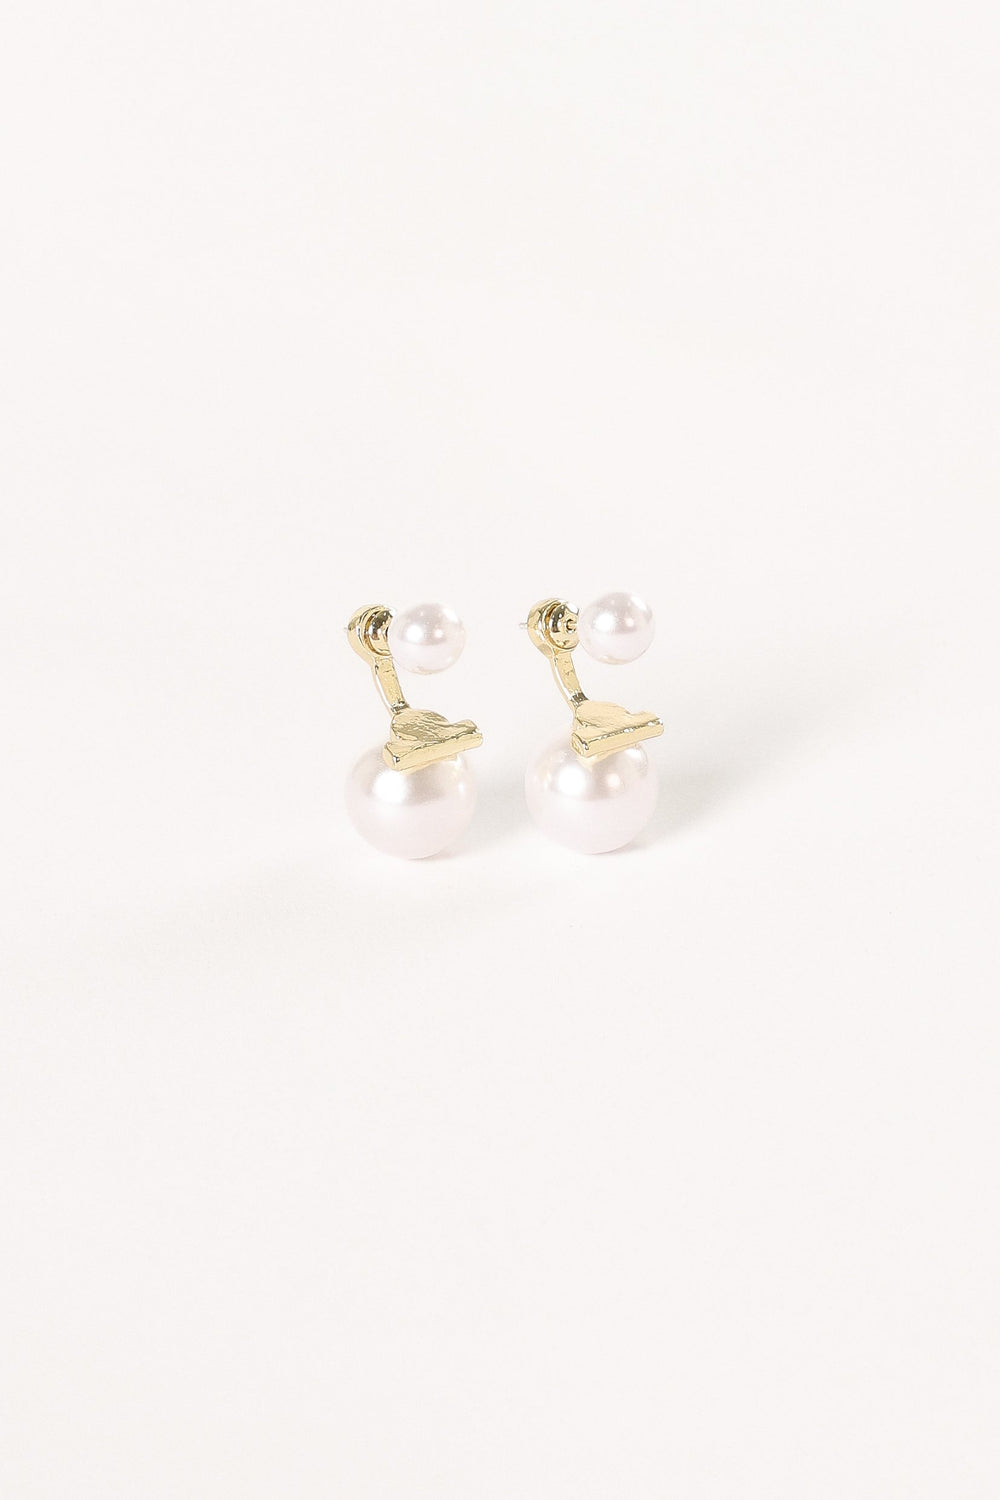 ACCESSORIES @Astrid Pear Earrings - Gold